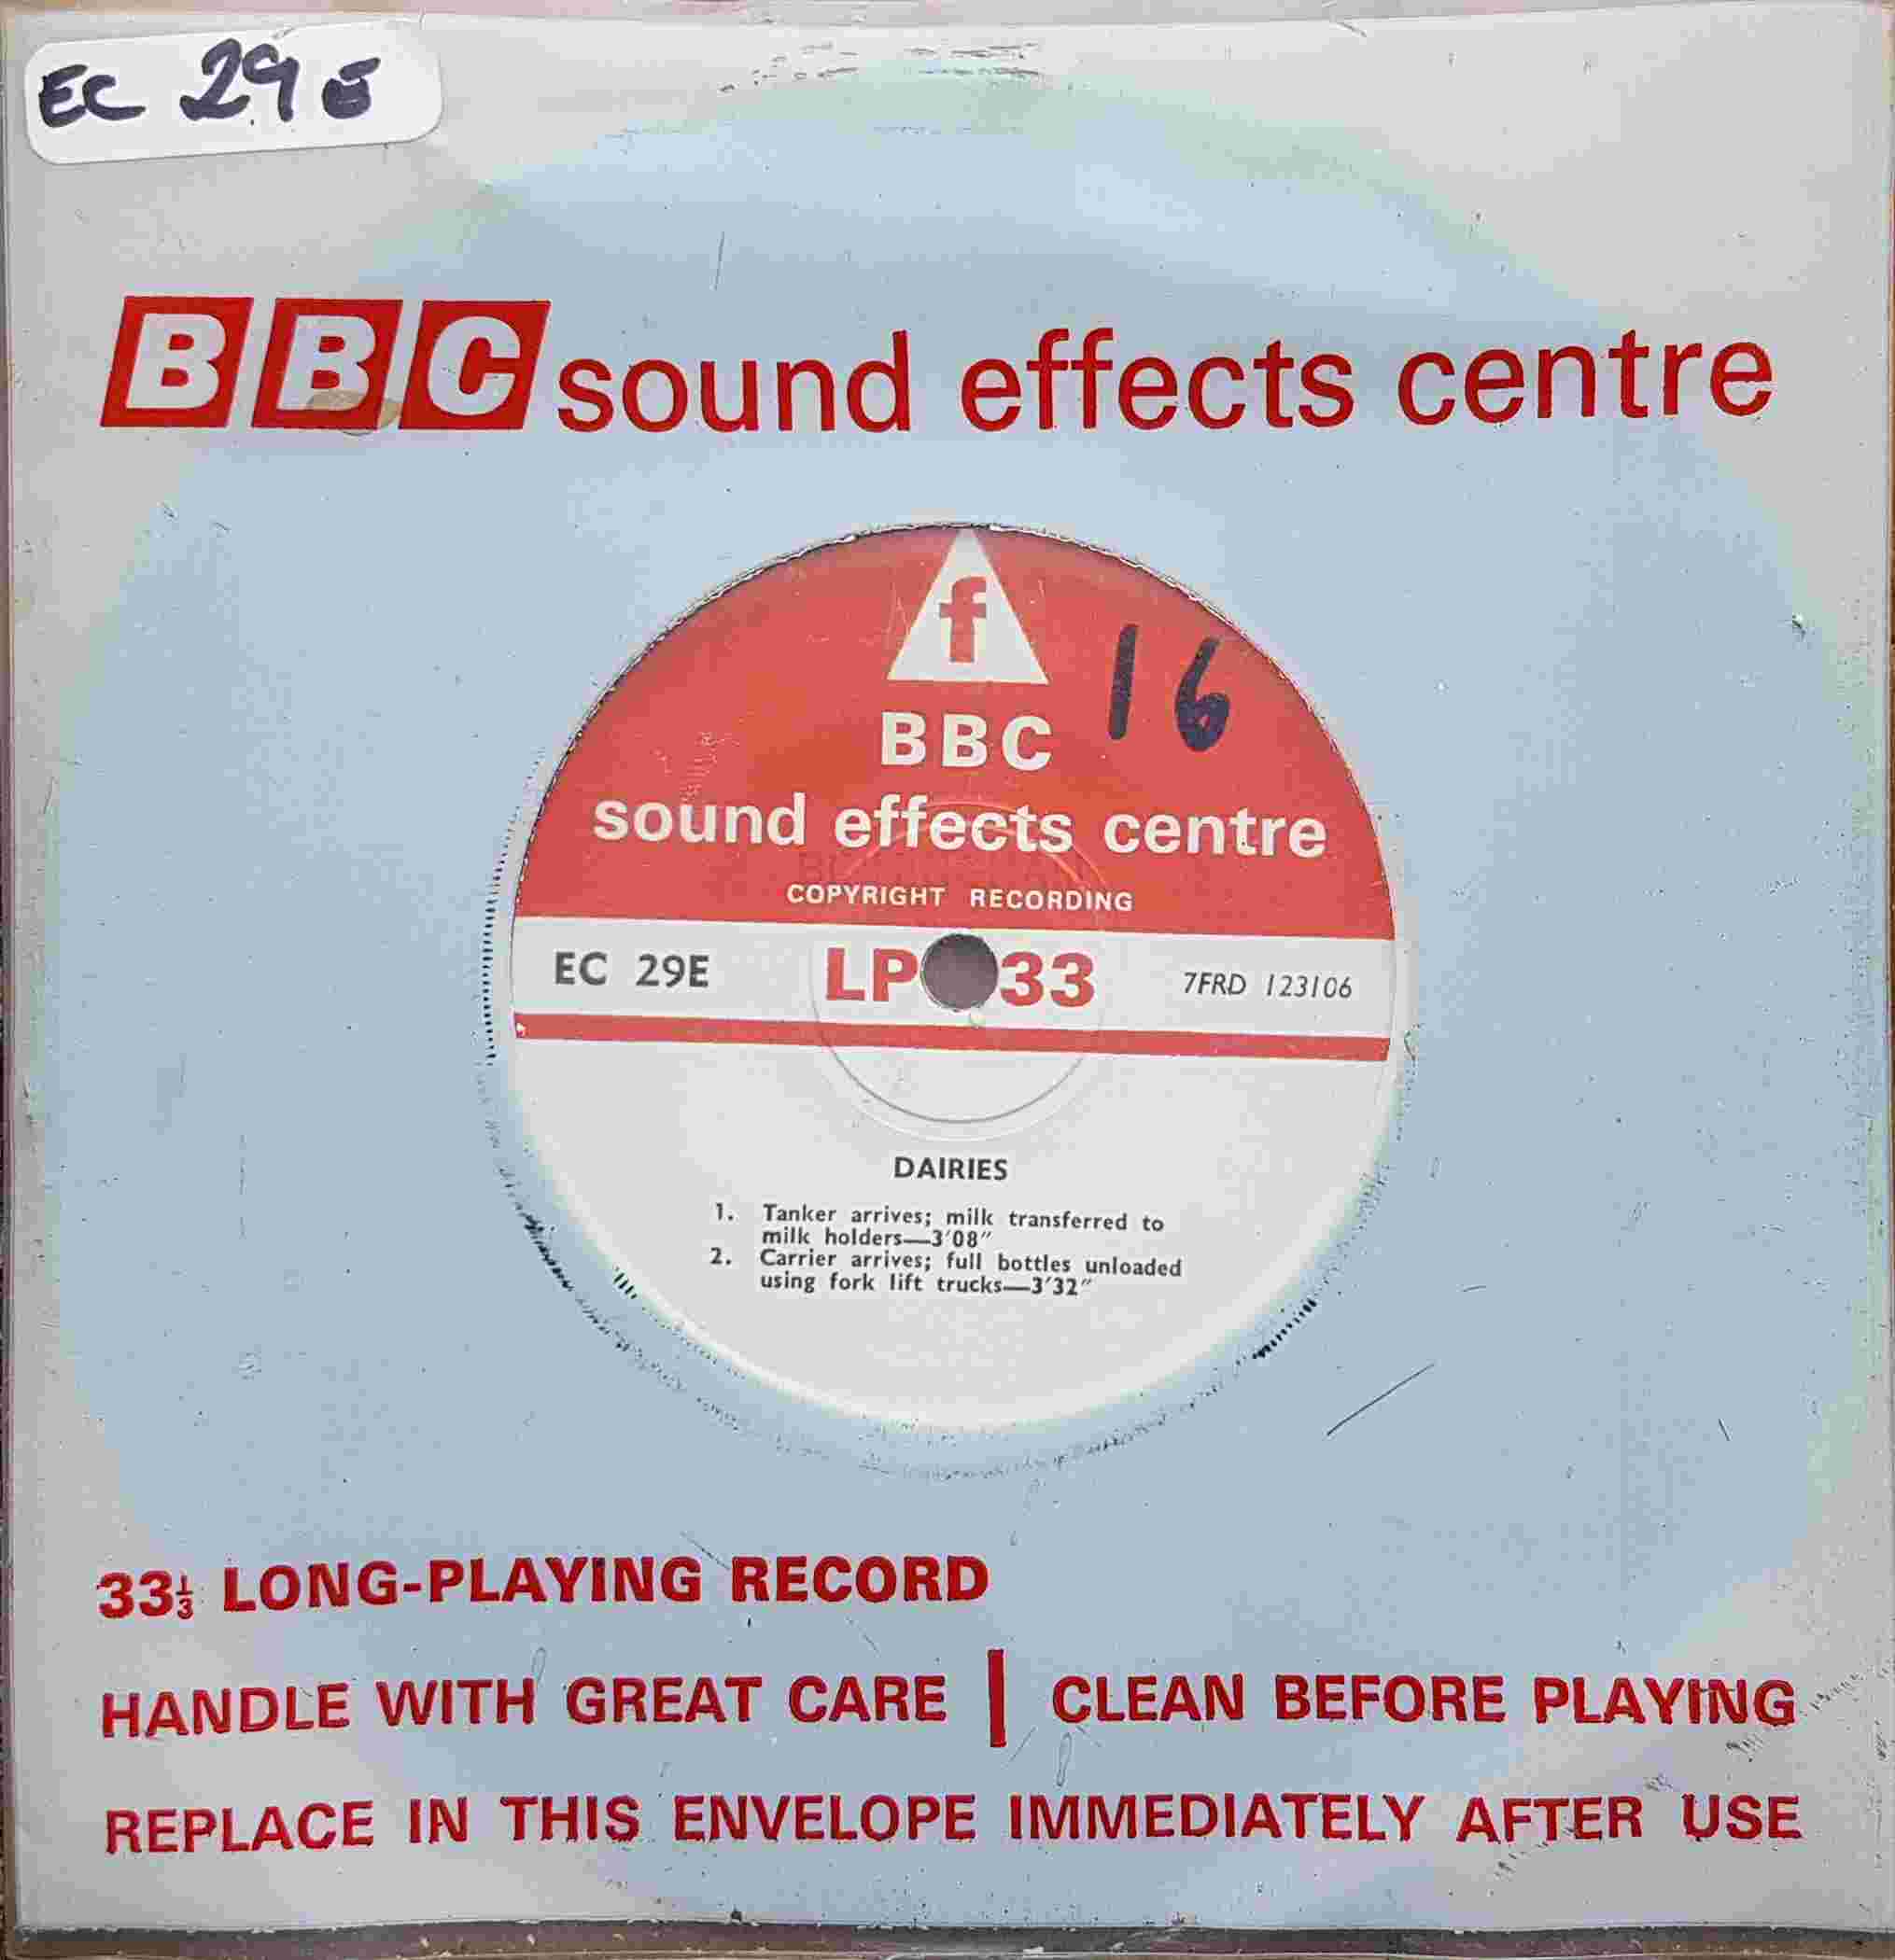 Picture of EC 29E Dairies by artist Not registered from the BBC singles - Records and Tapes library